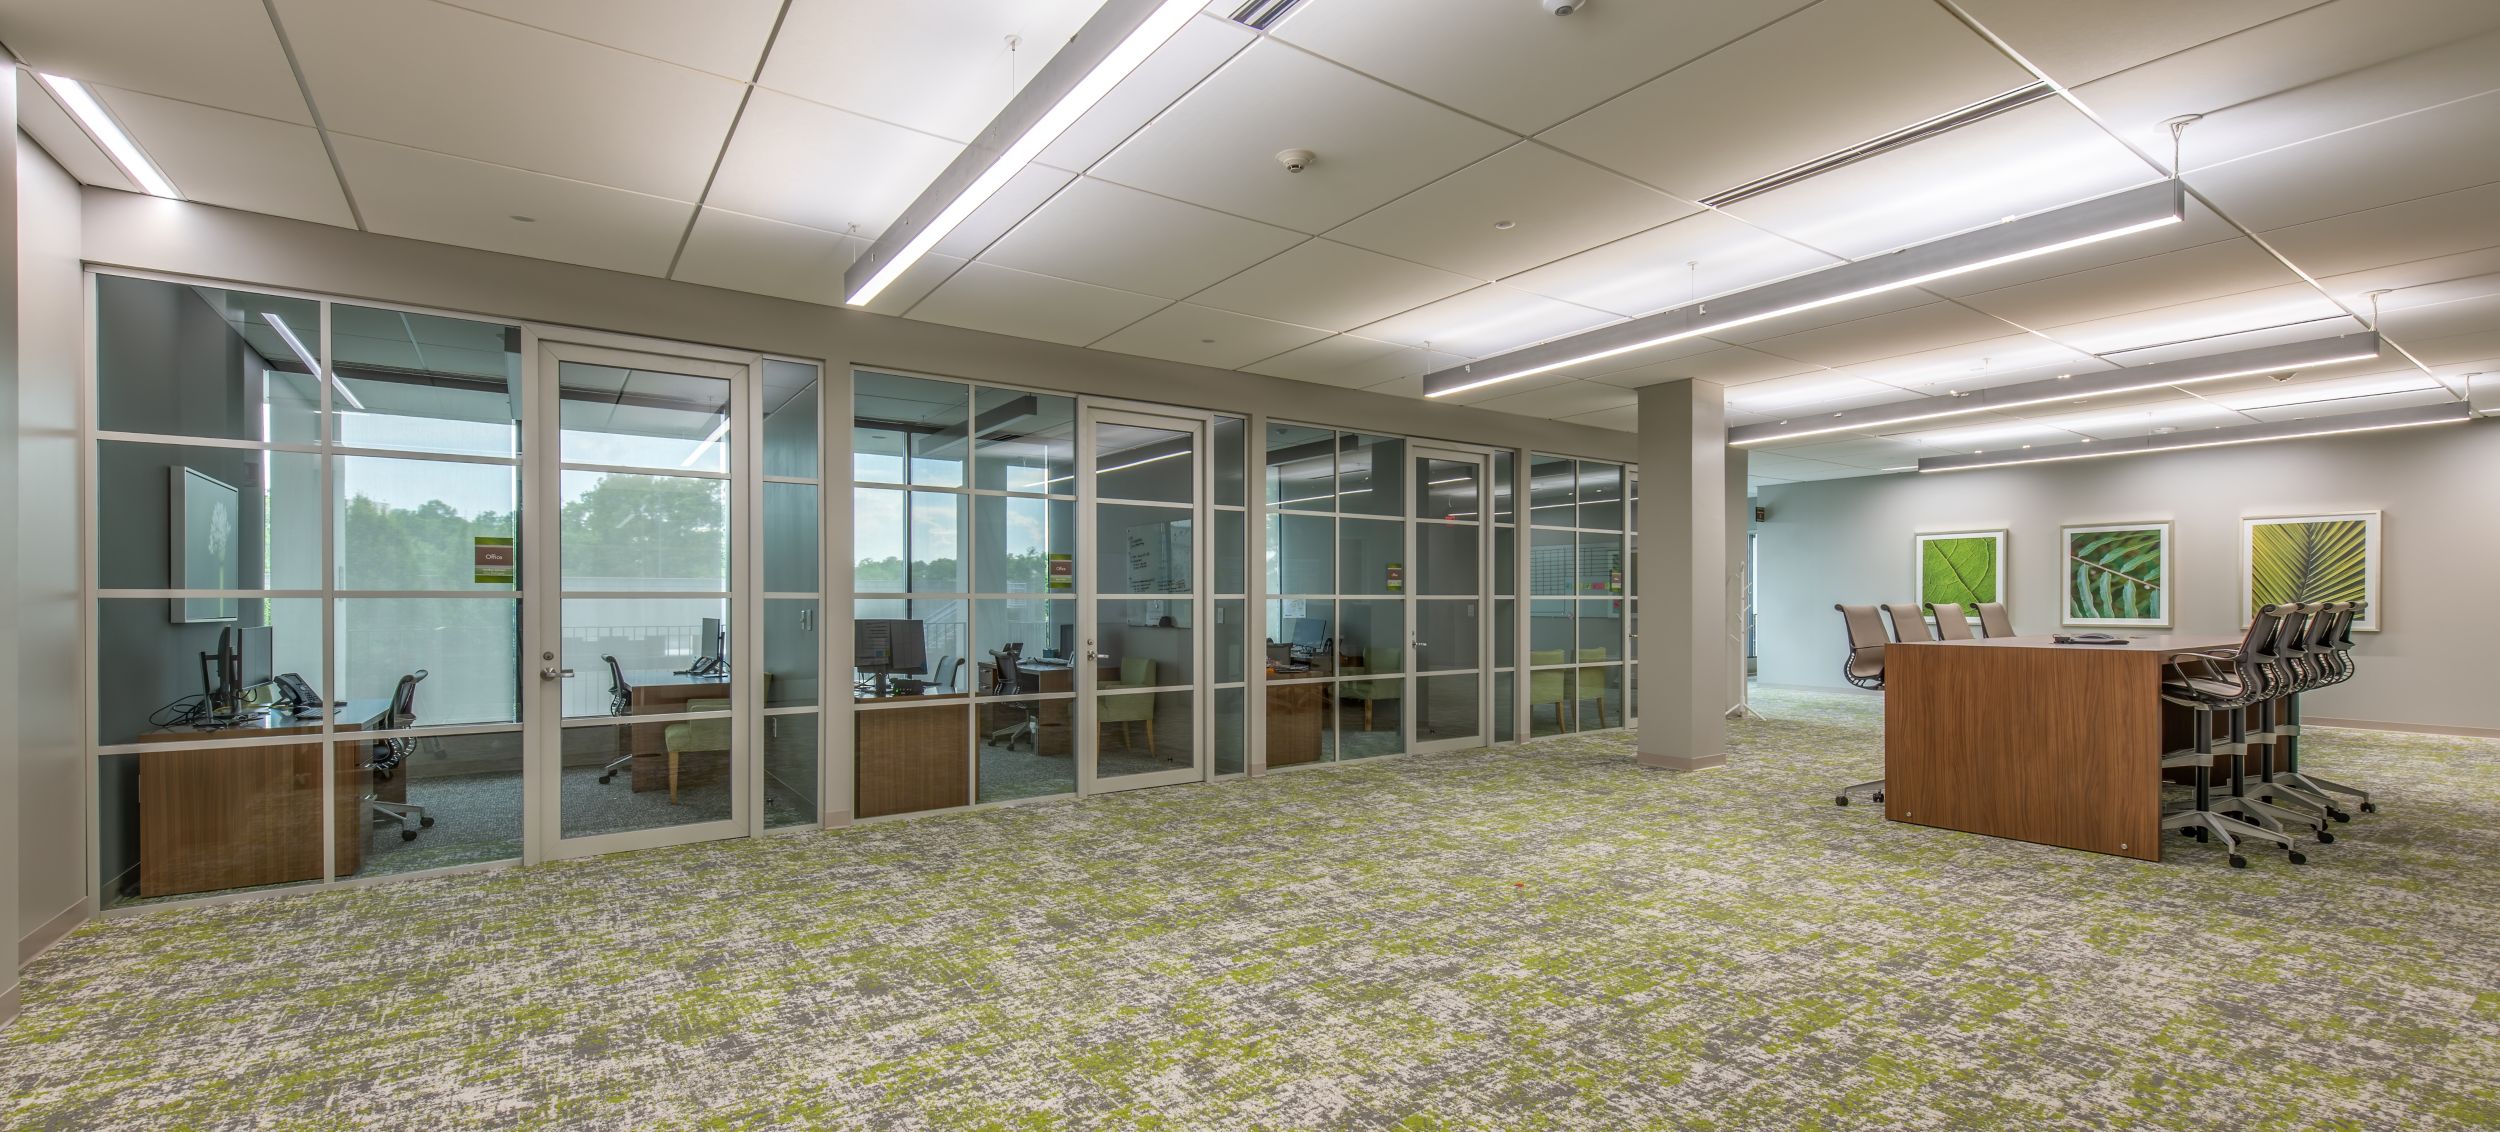 Interface Painted Gesture plank carpet tile in open meeting area with private offices in background image number 7